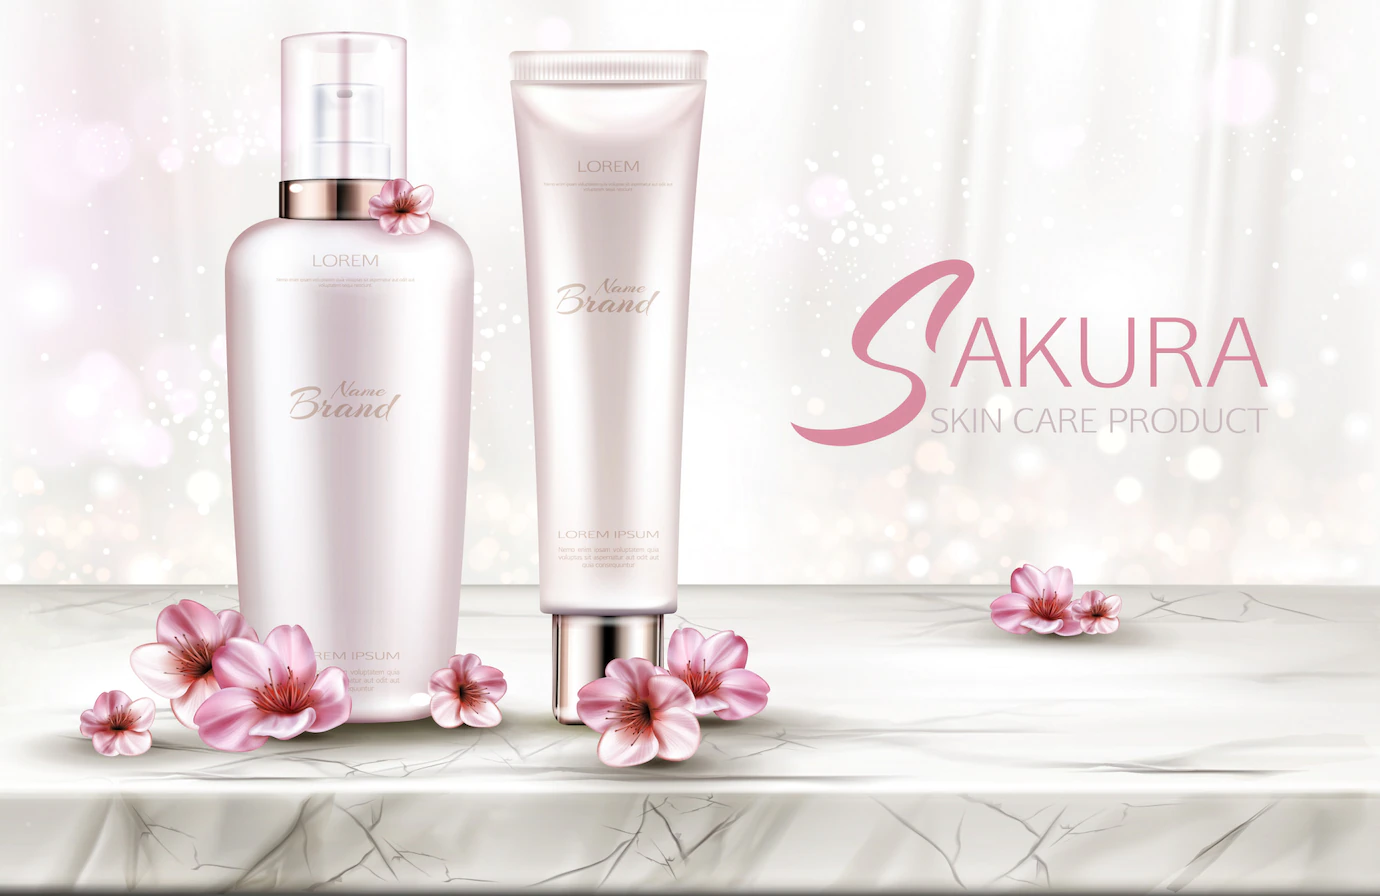 Cosmetics Bottles Skin Care Beauty Product Line With Sakura Flowers Marble Table Top 33099 1559